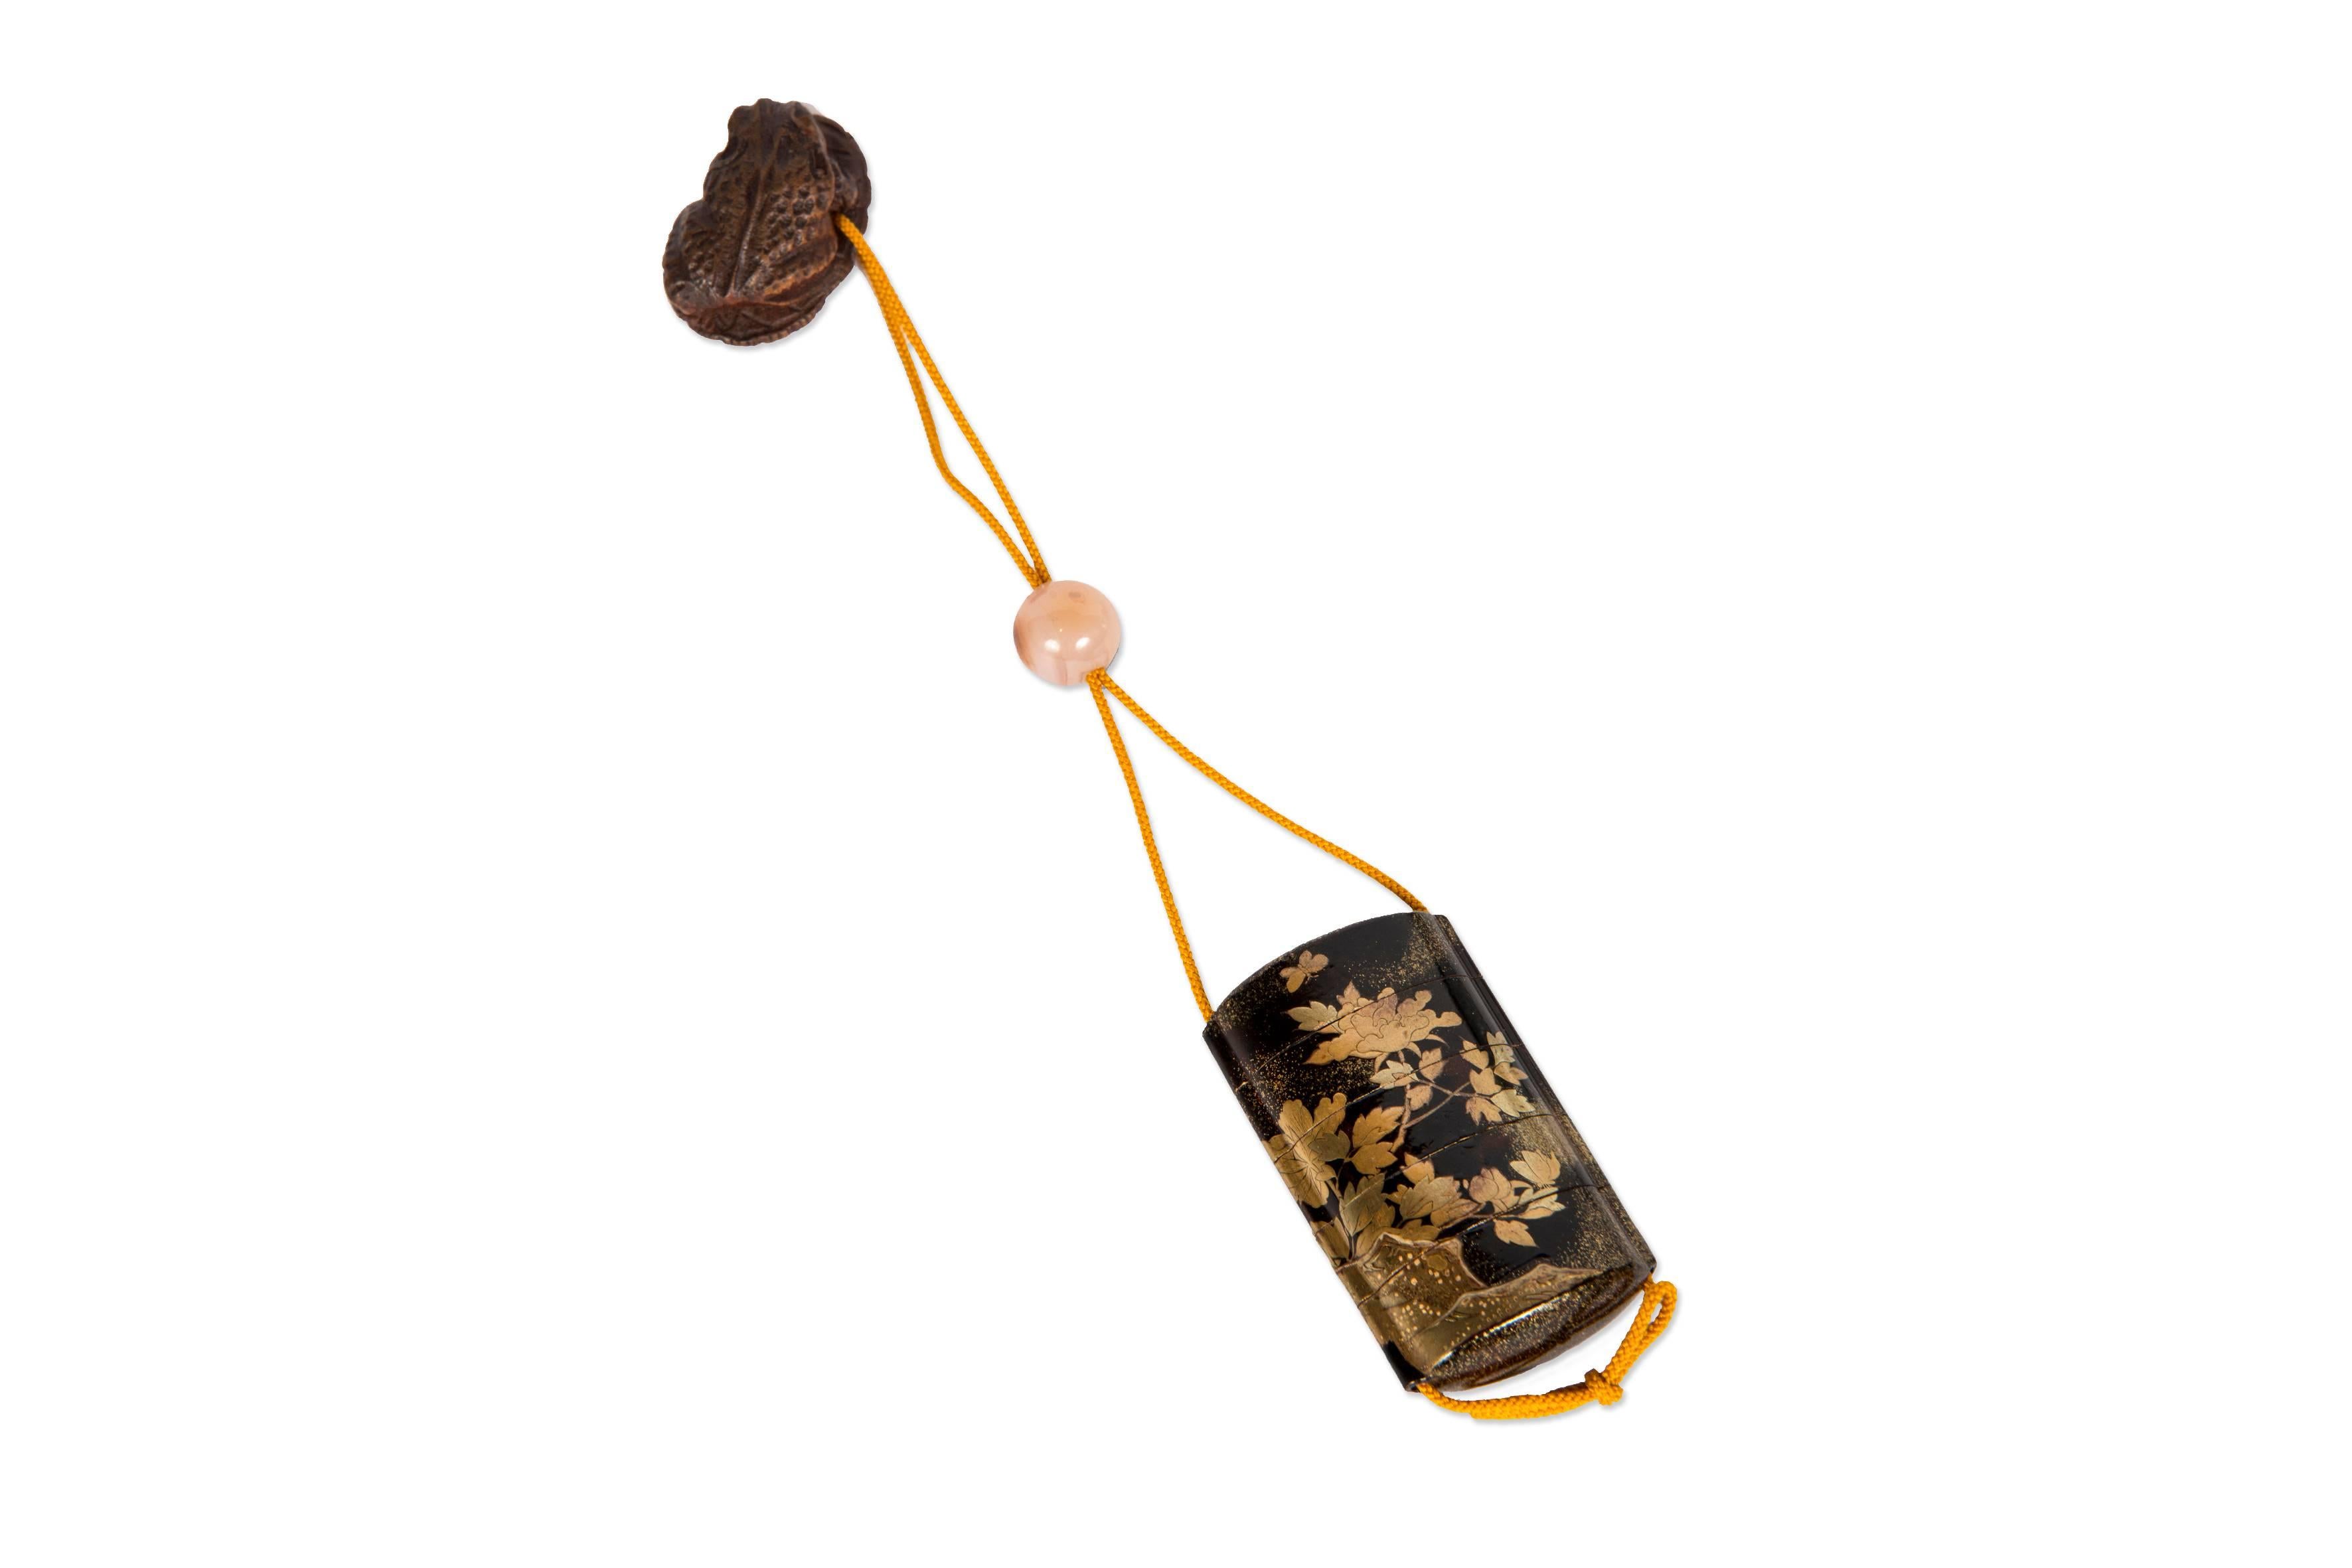 Inro are small divided boxes suspended from the belt which are a part of sagemono (suspended objects). Indeed, their use was developed to solve the lack of pocket in kimonos. 
This one is black lacquer with motives of leaves and flowers in gilded